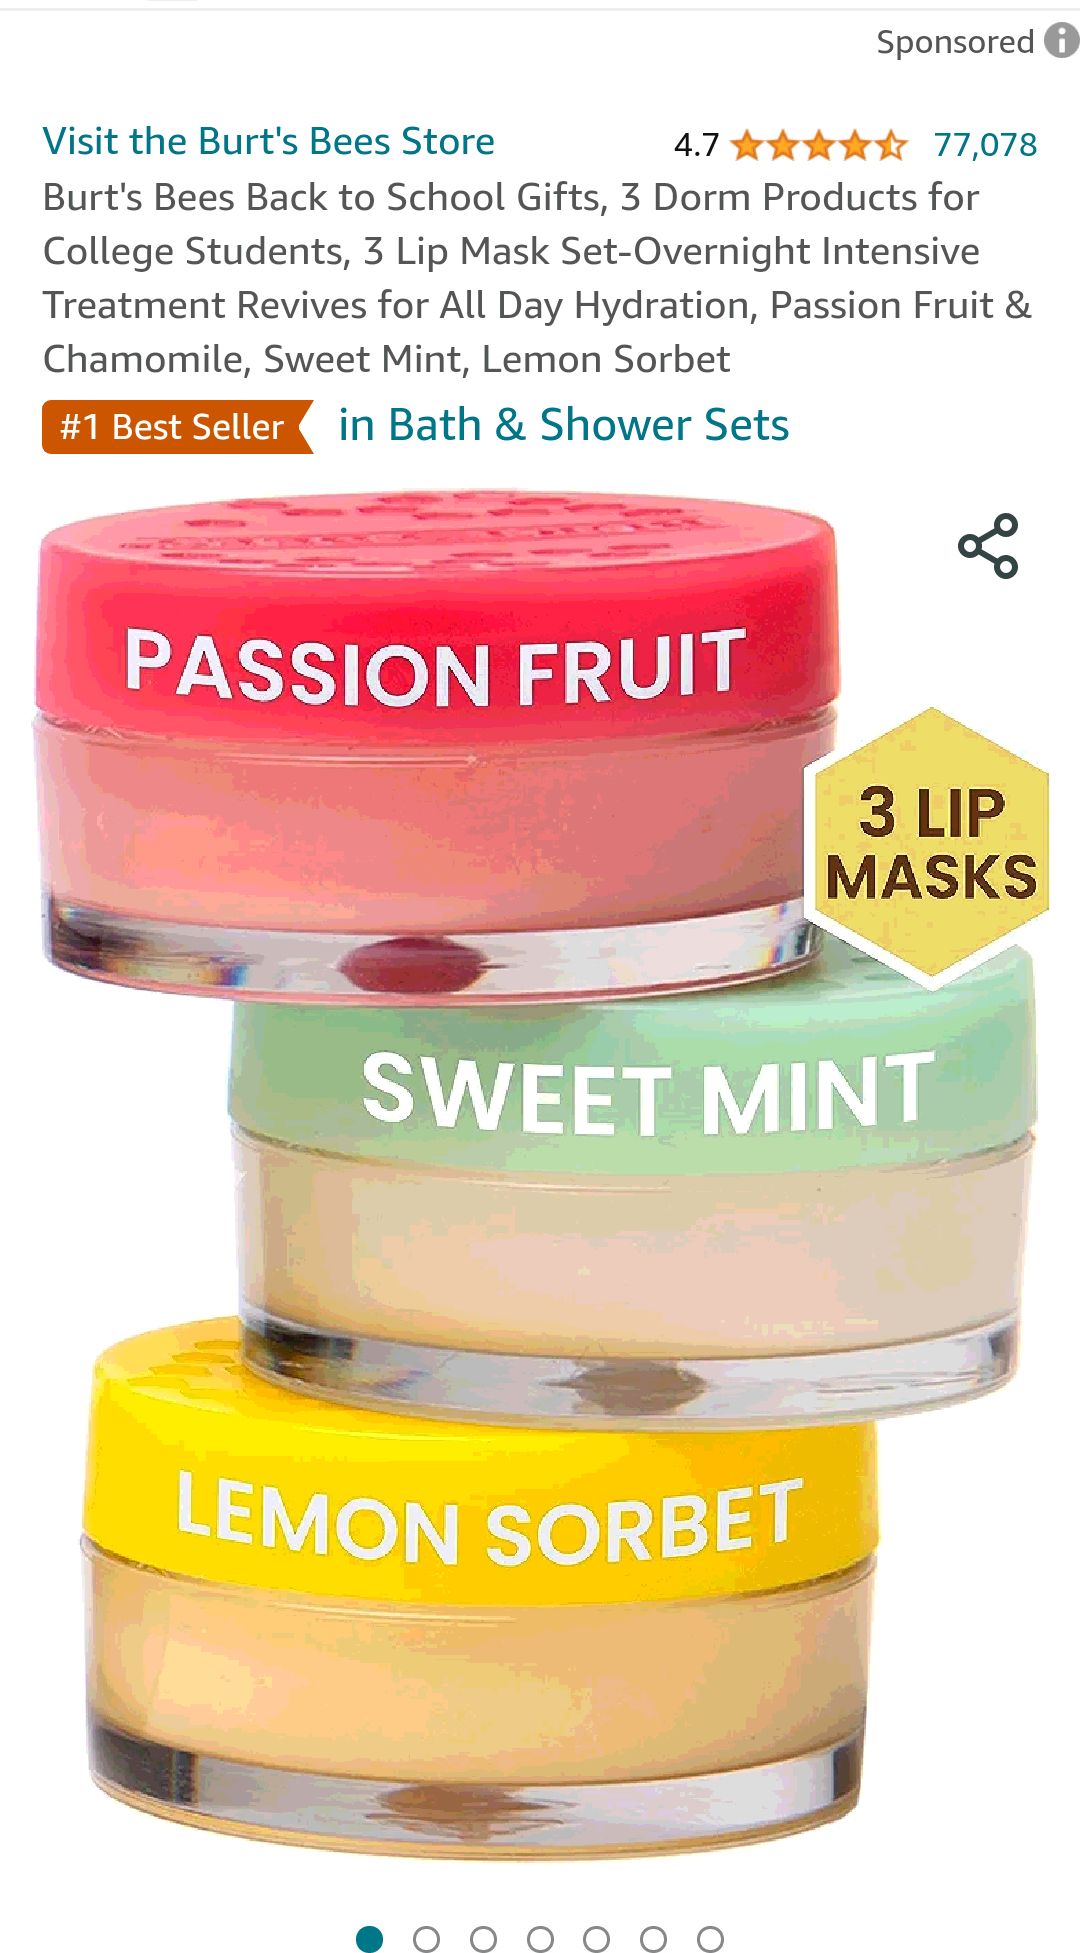 Burt's Bees Back to School Gifts, 3 Dorm Products for College Students, 3 Lip Mask Set-Overnight Intensive Treatment Revives for All Day Hydration, Passion Fruit & Chamomile, Sweet Mint, Lemon Sorbet 